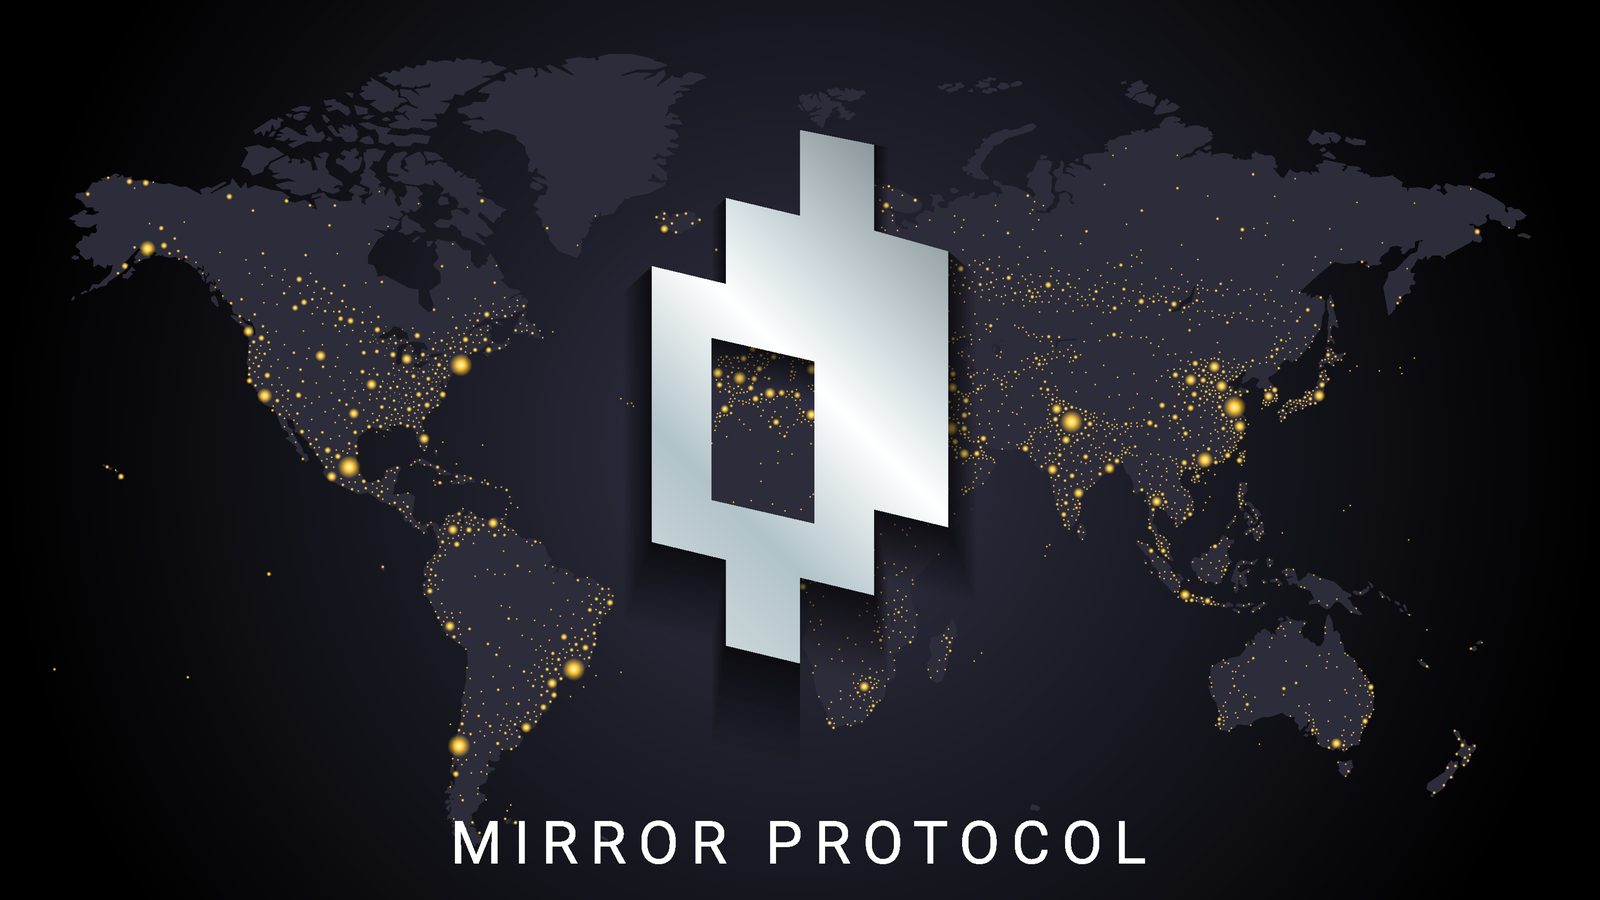 Mirror Protocol Suffers Losses Thanks to Luna Classic-Fueled Exploit